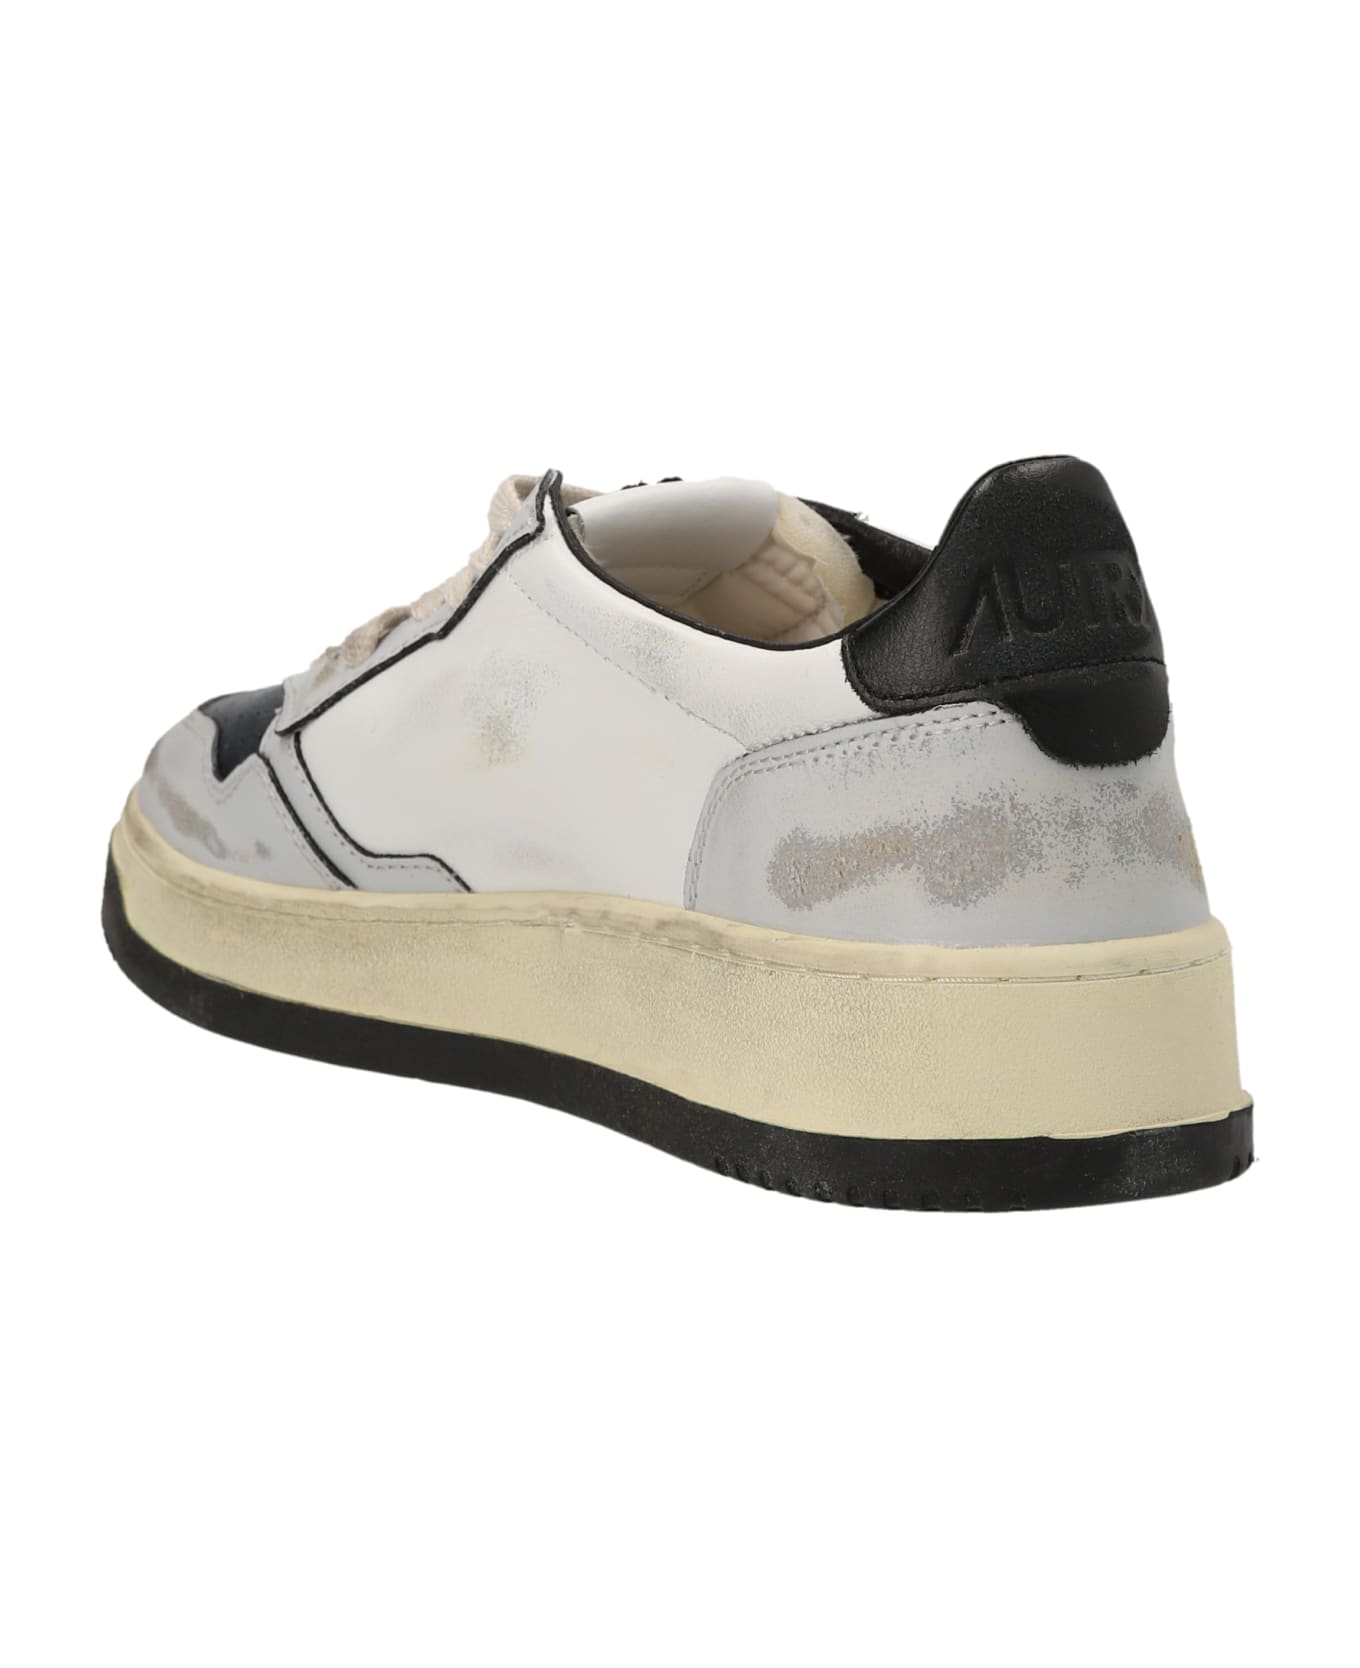 Autry Sup Vint Sneakers In White Leather - white